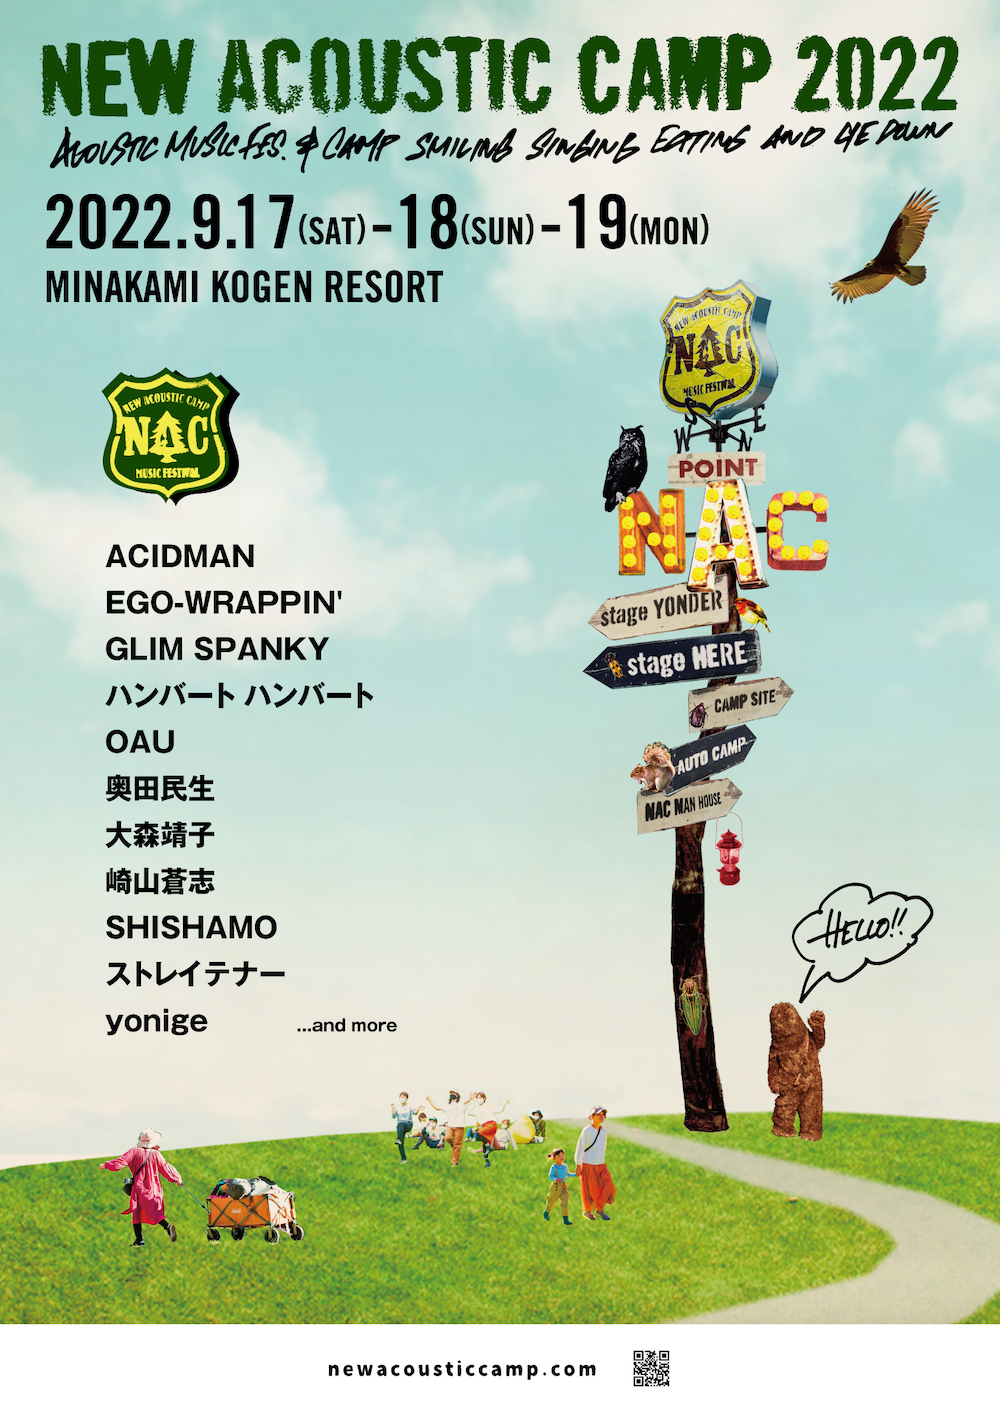 New Acoustic Camp 2022』全チケット情報と会場マップ解禁 | SPICE